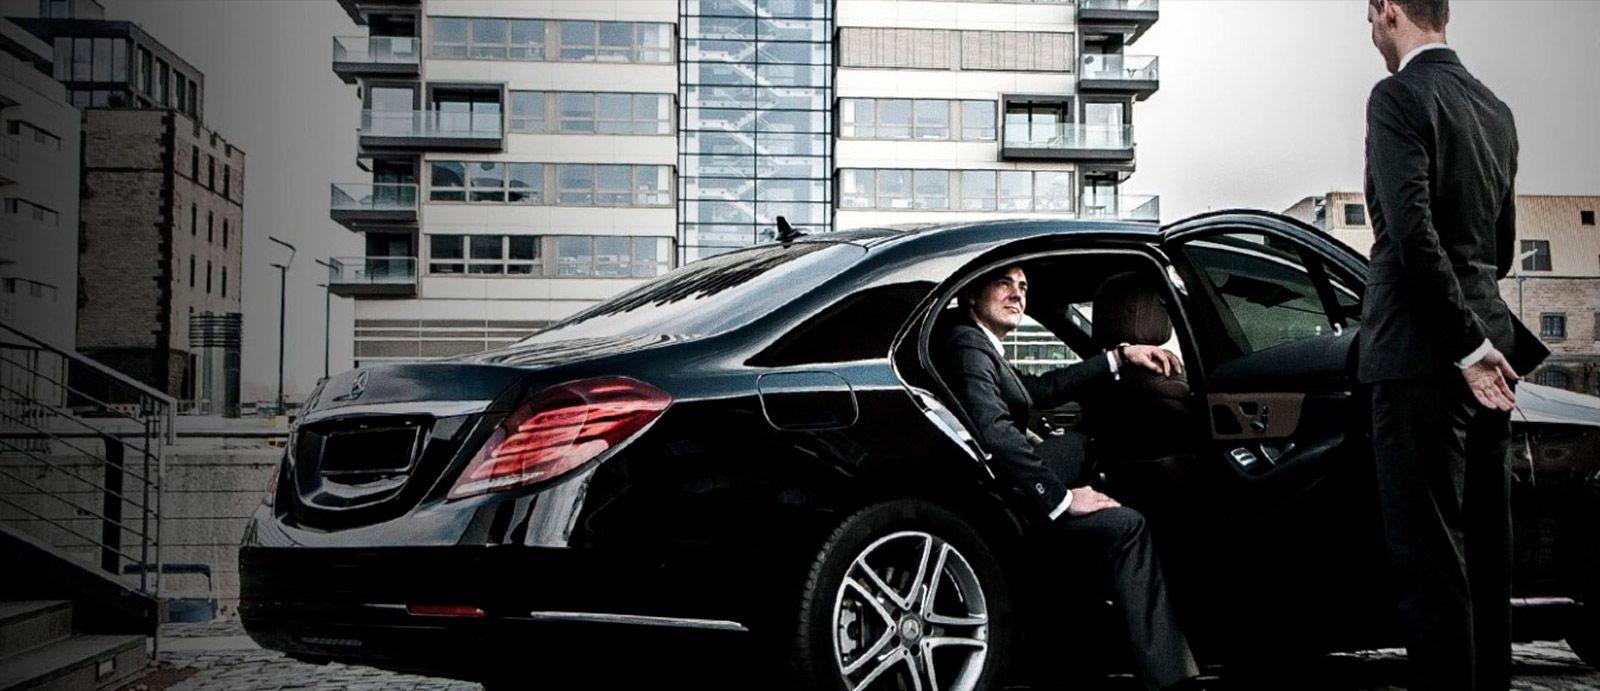 The Advantages Of Pre-Booking Limousine Services For Your Trip To Zurich